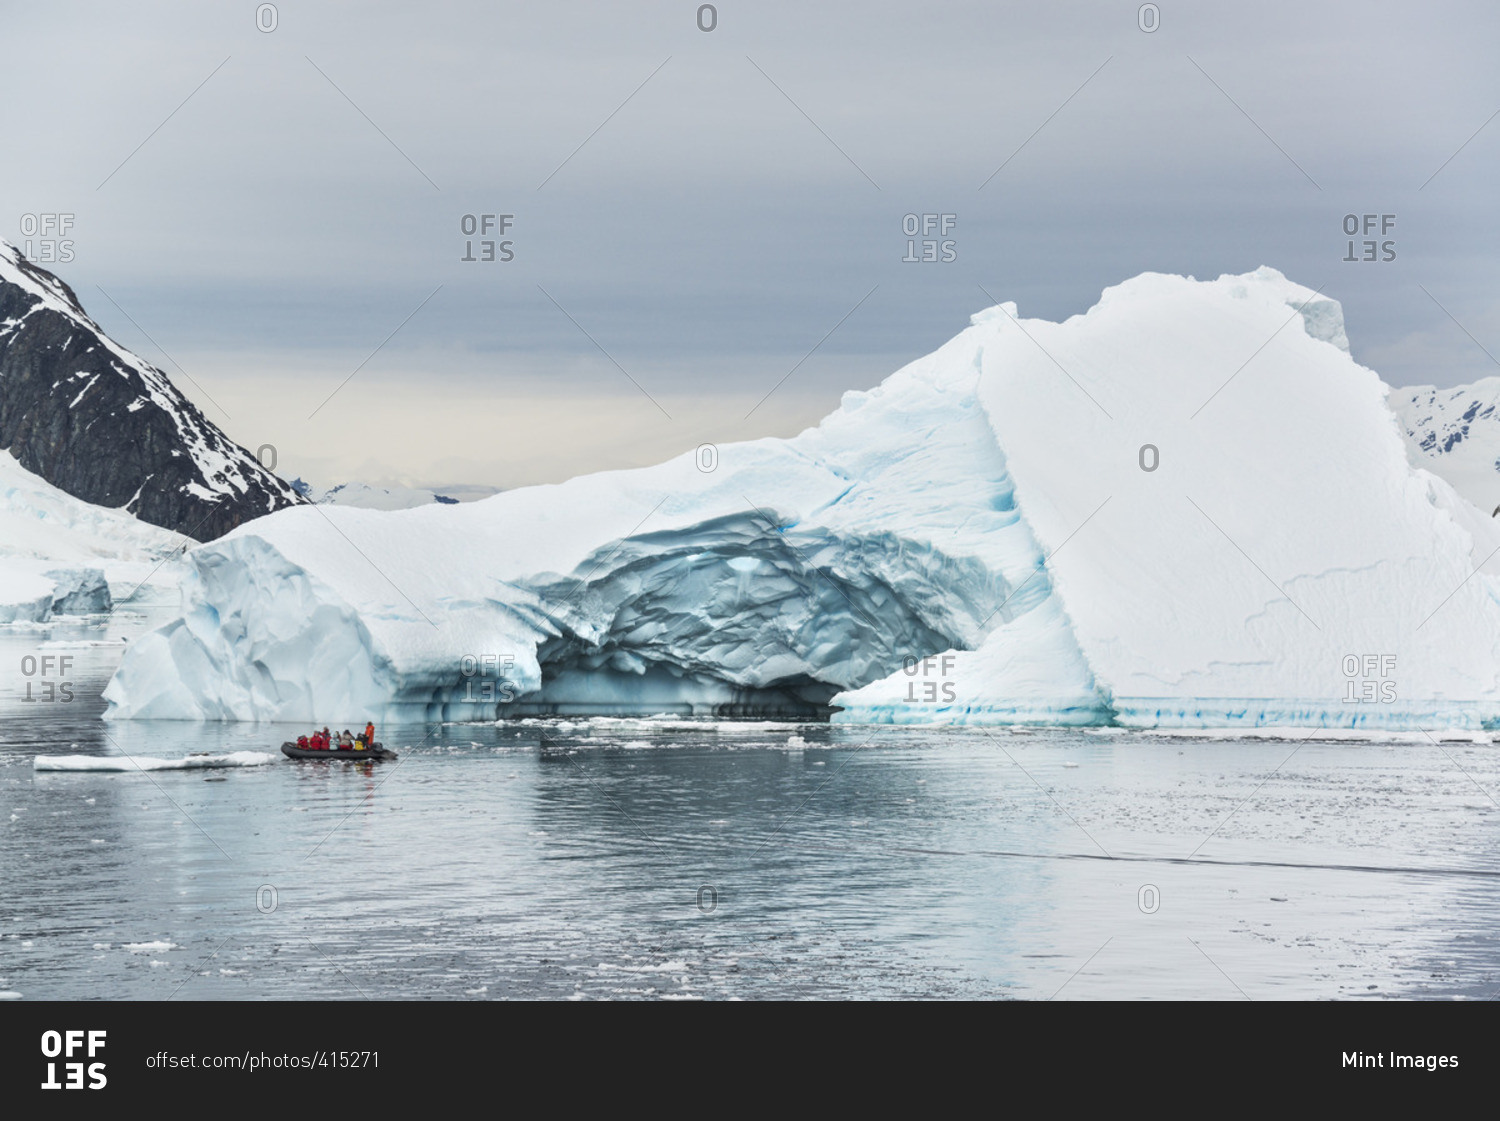 Group of people crossing the ocean in the Antarctic in a rubber boat, icebergs in the background